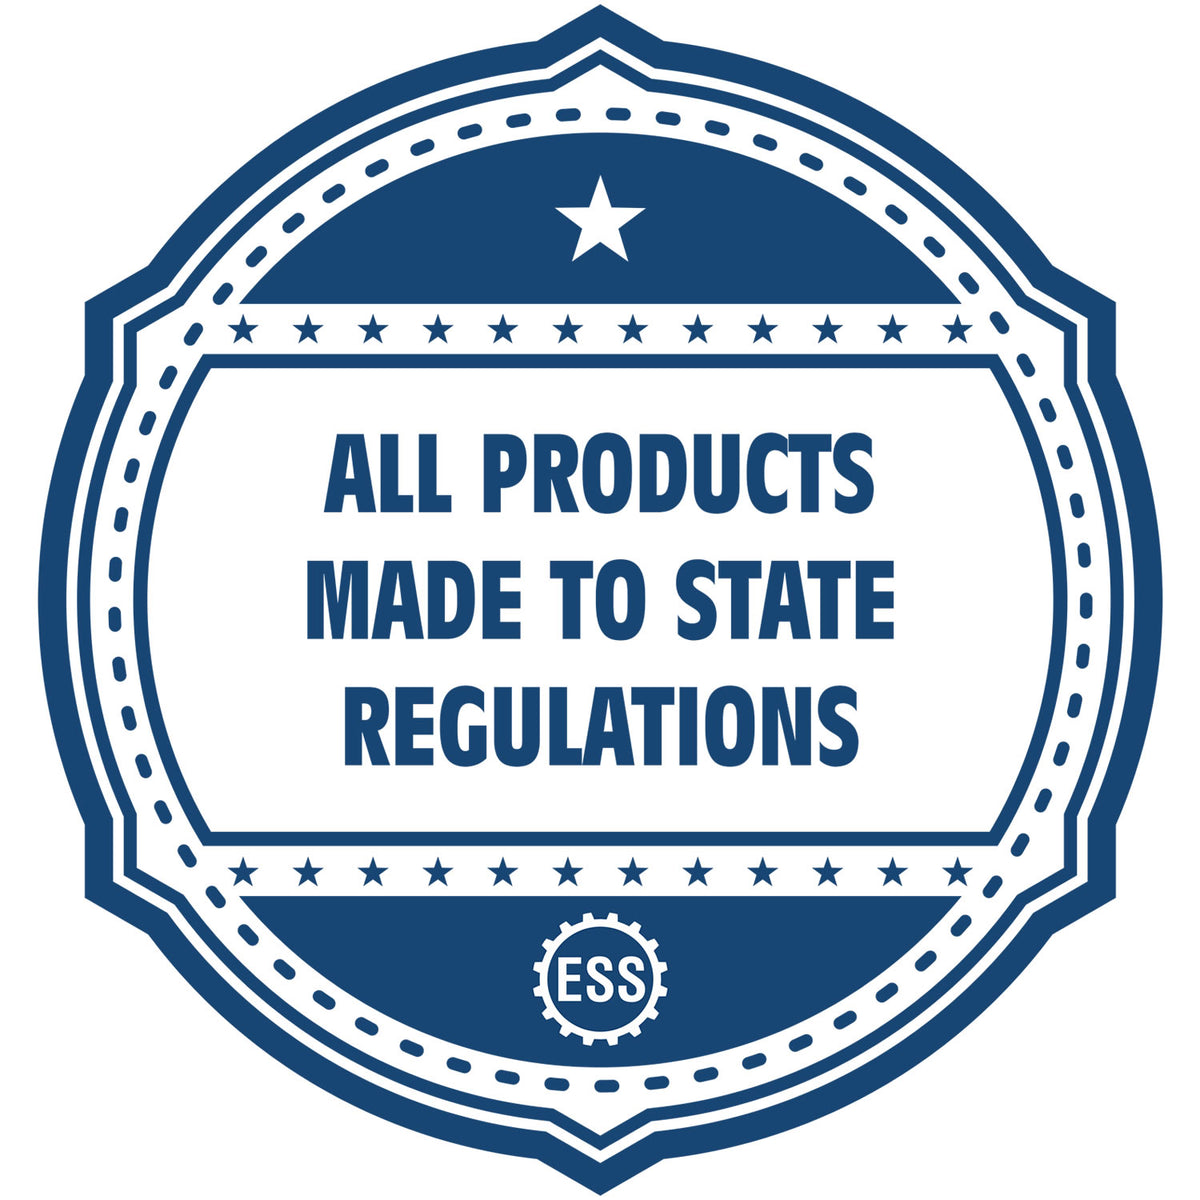 An icon or badge element for the Digital South Dakota Landscape Architect Stamp showing that this product is made in compliance with state regulations.